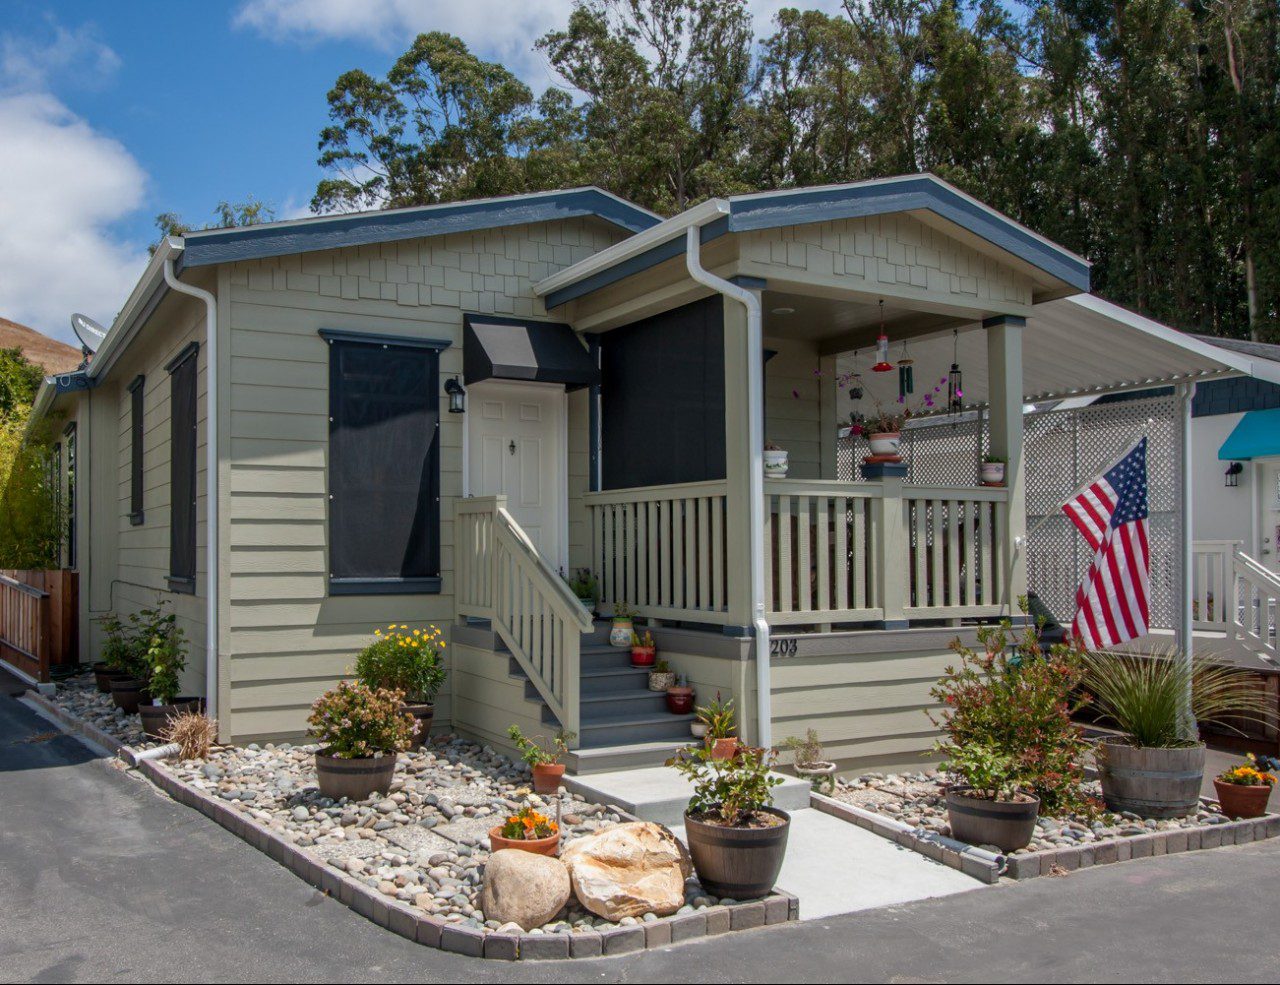   A beige manufactured home with a US flag outside